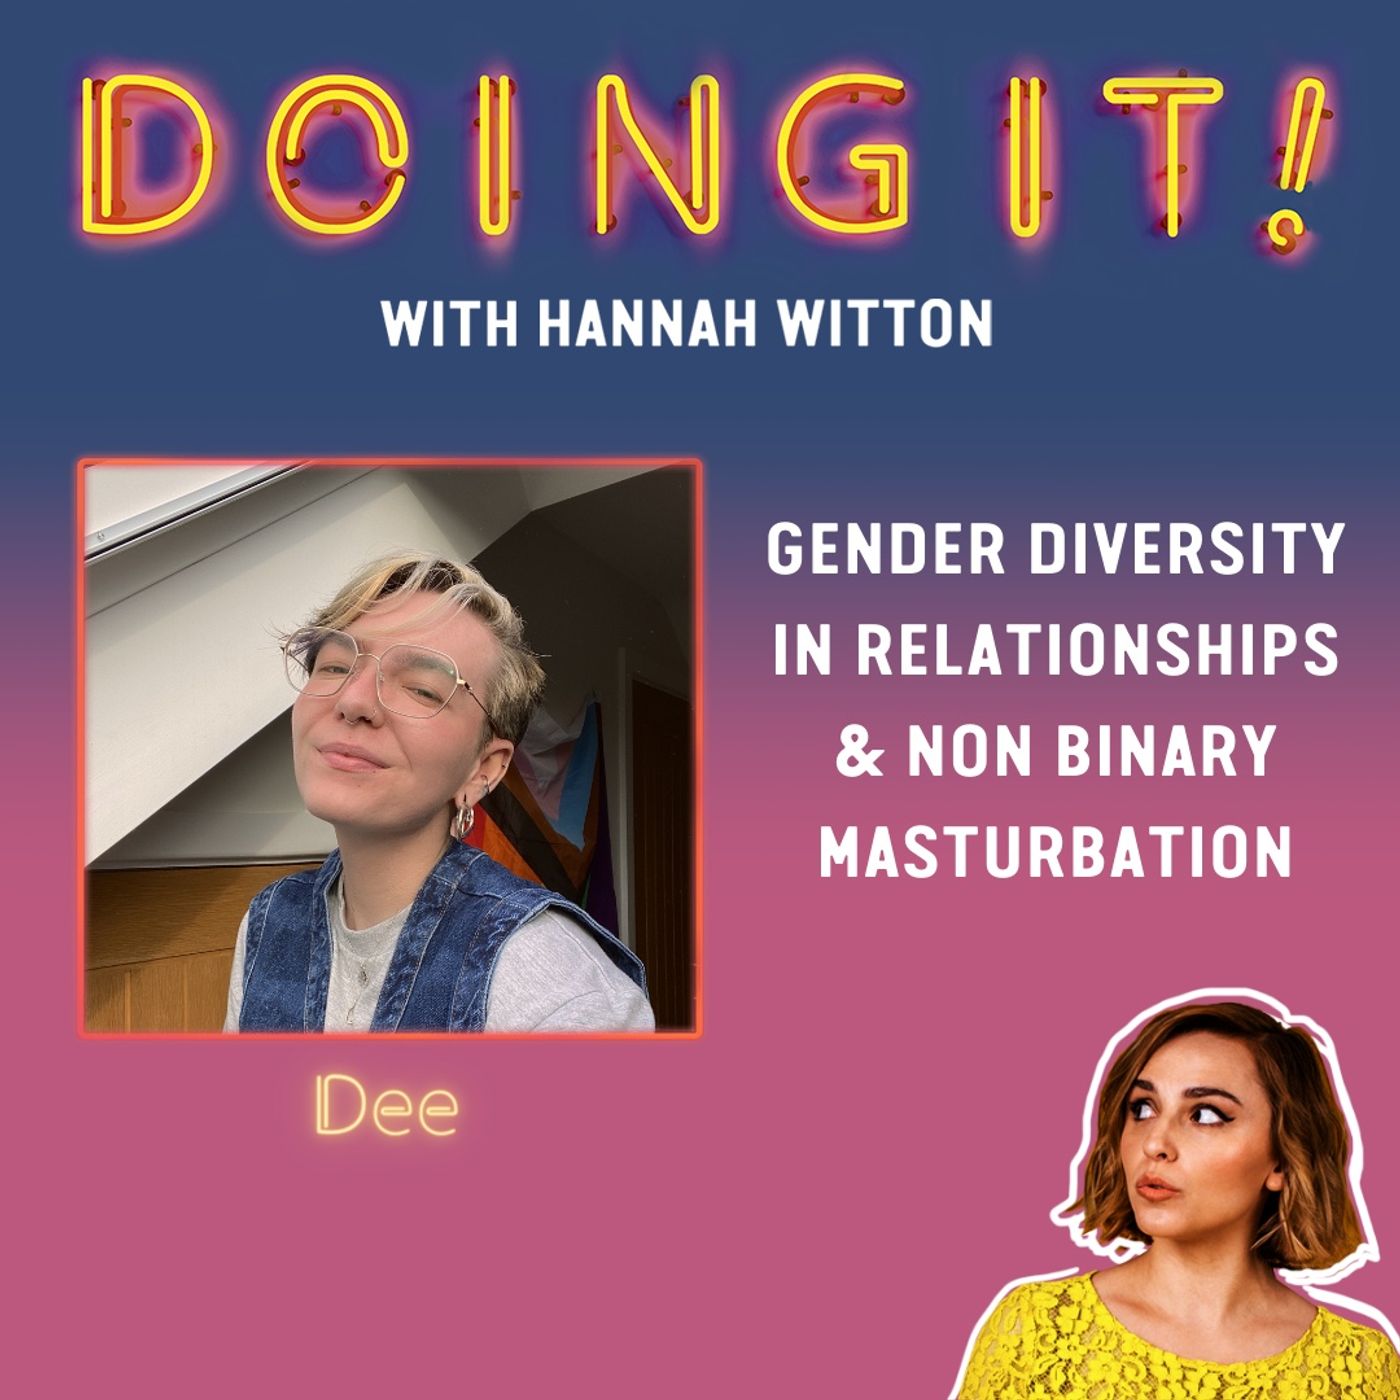 Gender Diversity in Relationships and Non-Binary Masturbation with Dee